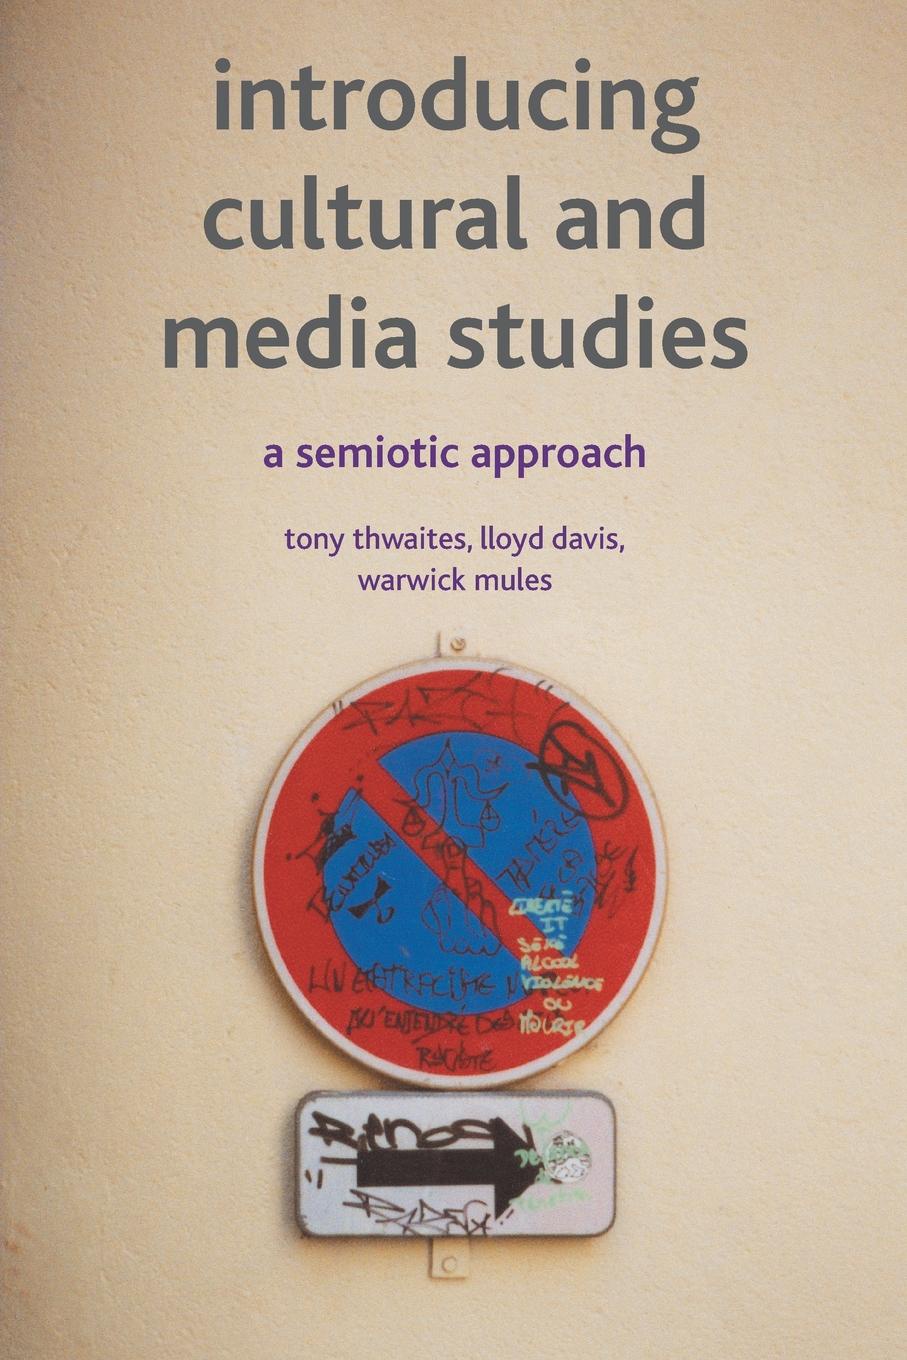 Introducing Cultural and Media Studies. A Semiotic Approach